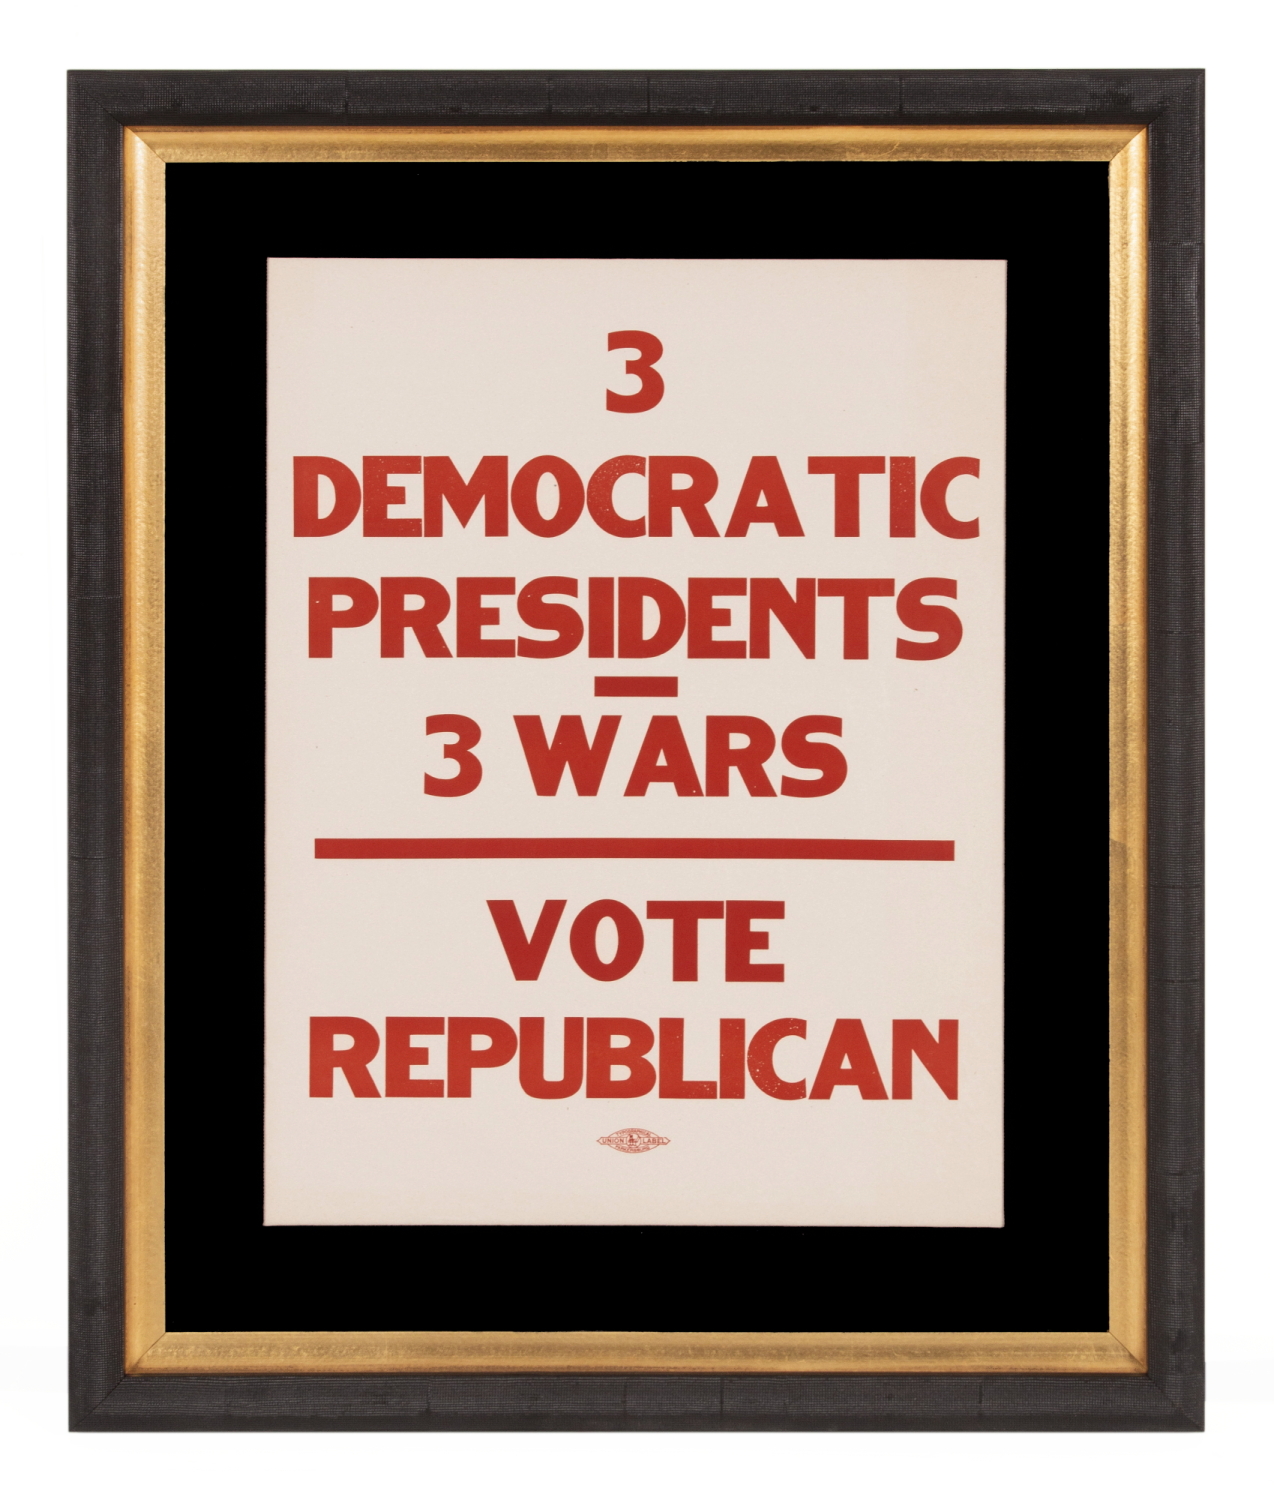 3 DEMOCRATIC PRESIDENTS – 3 WARS: A FUN, INTERESTING, AND RARE REPUBLICAN CAMPAIGN POSTER FROM EITHER THE 1952 OR 1956 CAMPAIGNS OF EISENHOWER vs. ADALAI STEVENSON, OR PERHAPS THE 1960 CAMPAIGN OF NIXON vs. KENNEDY